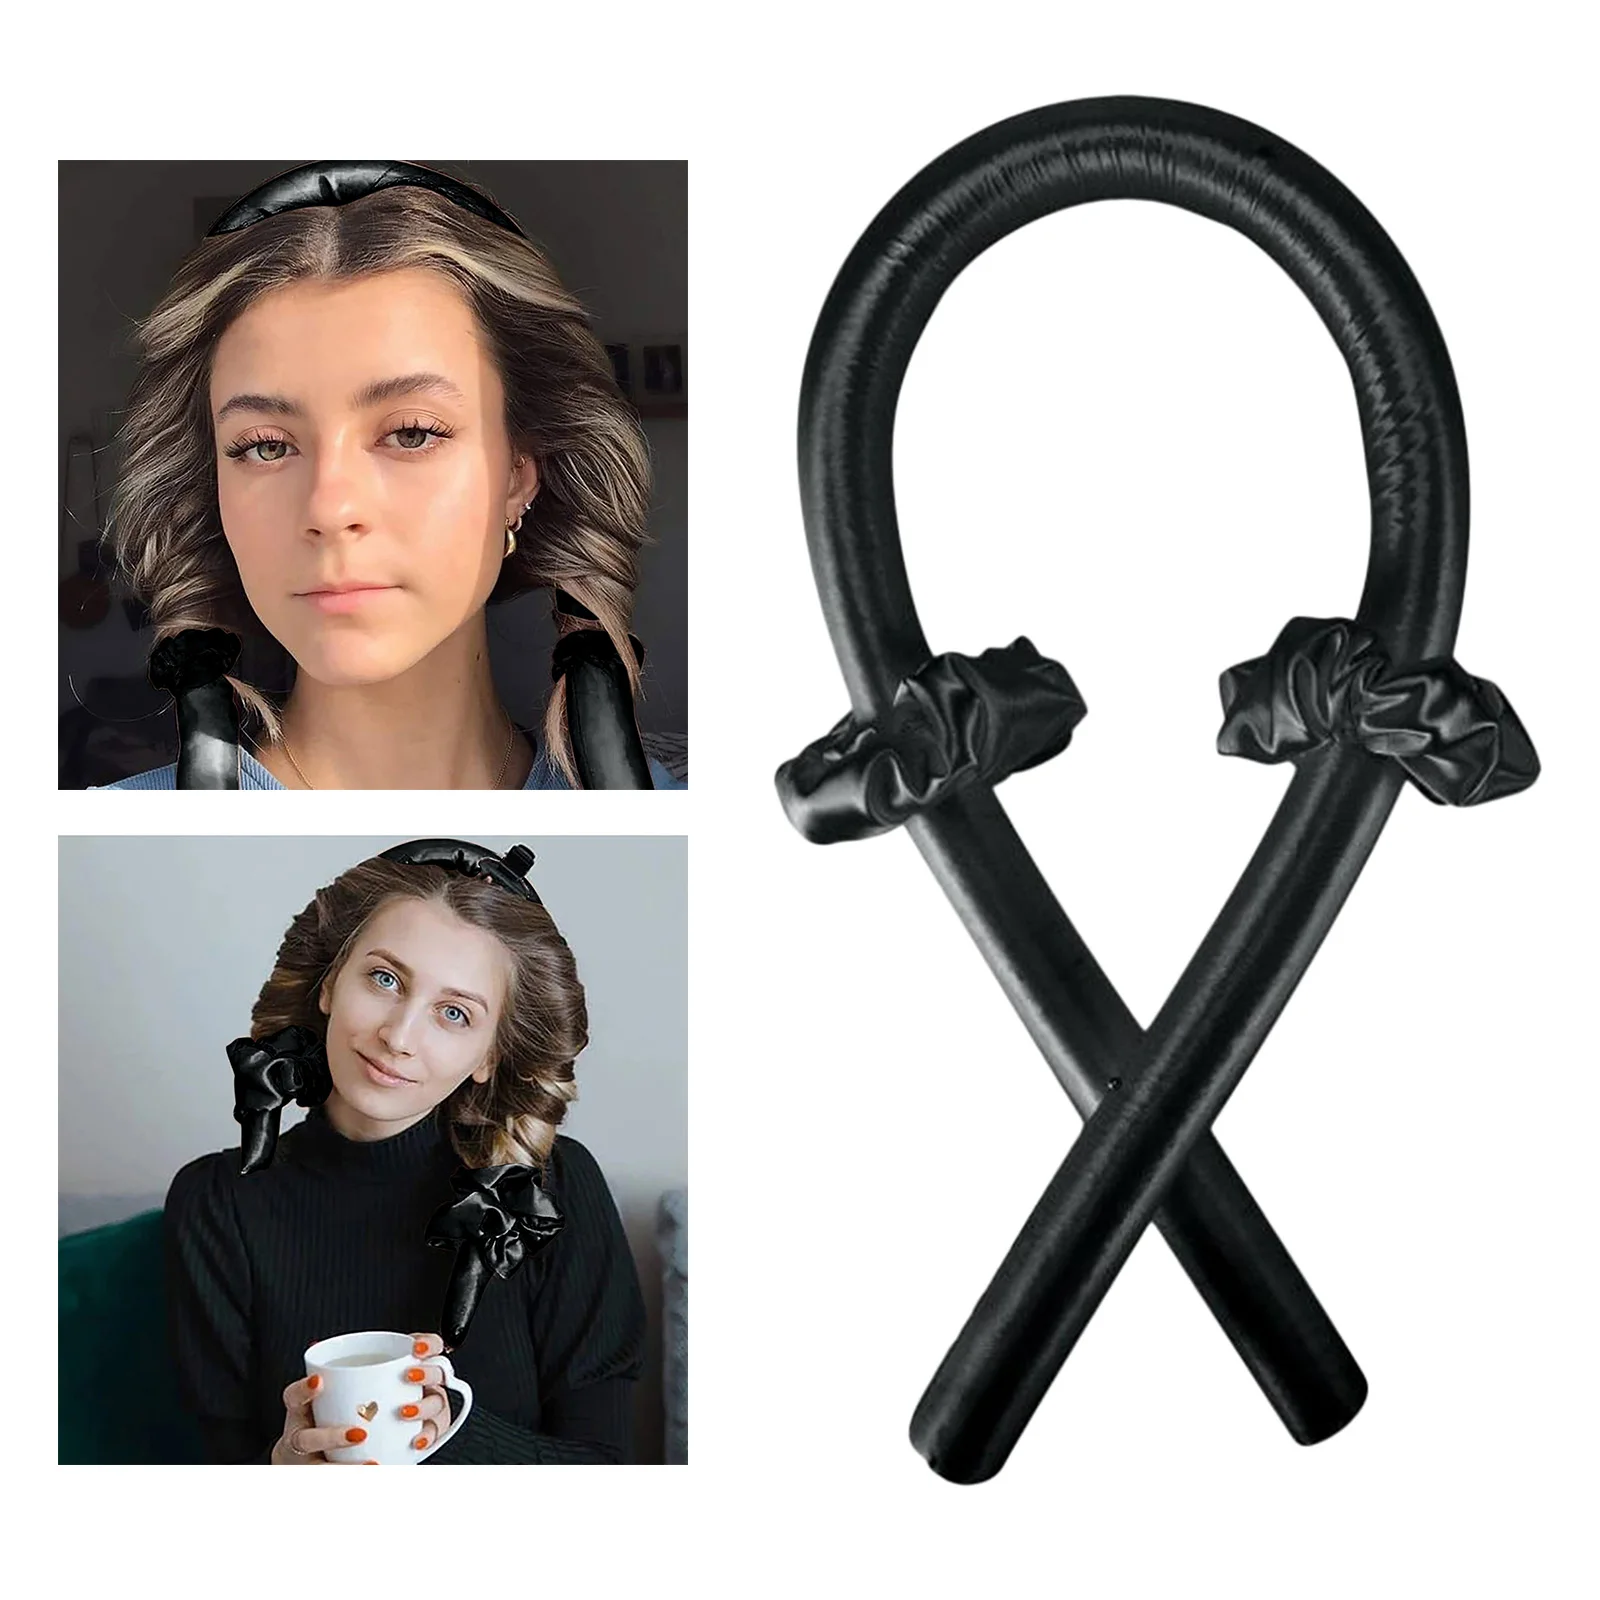 Heatless Curling Rod Headband, Ribbon Hair Rollers, Say Goodbye to Breaks and Split Ends, Say Hello to Healthy Hair